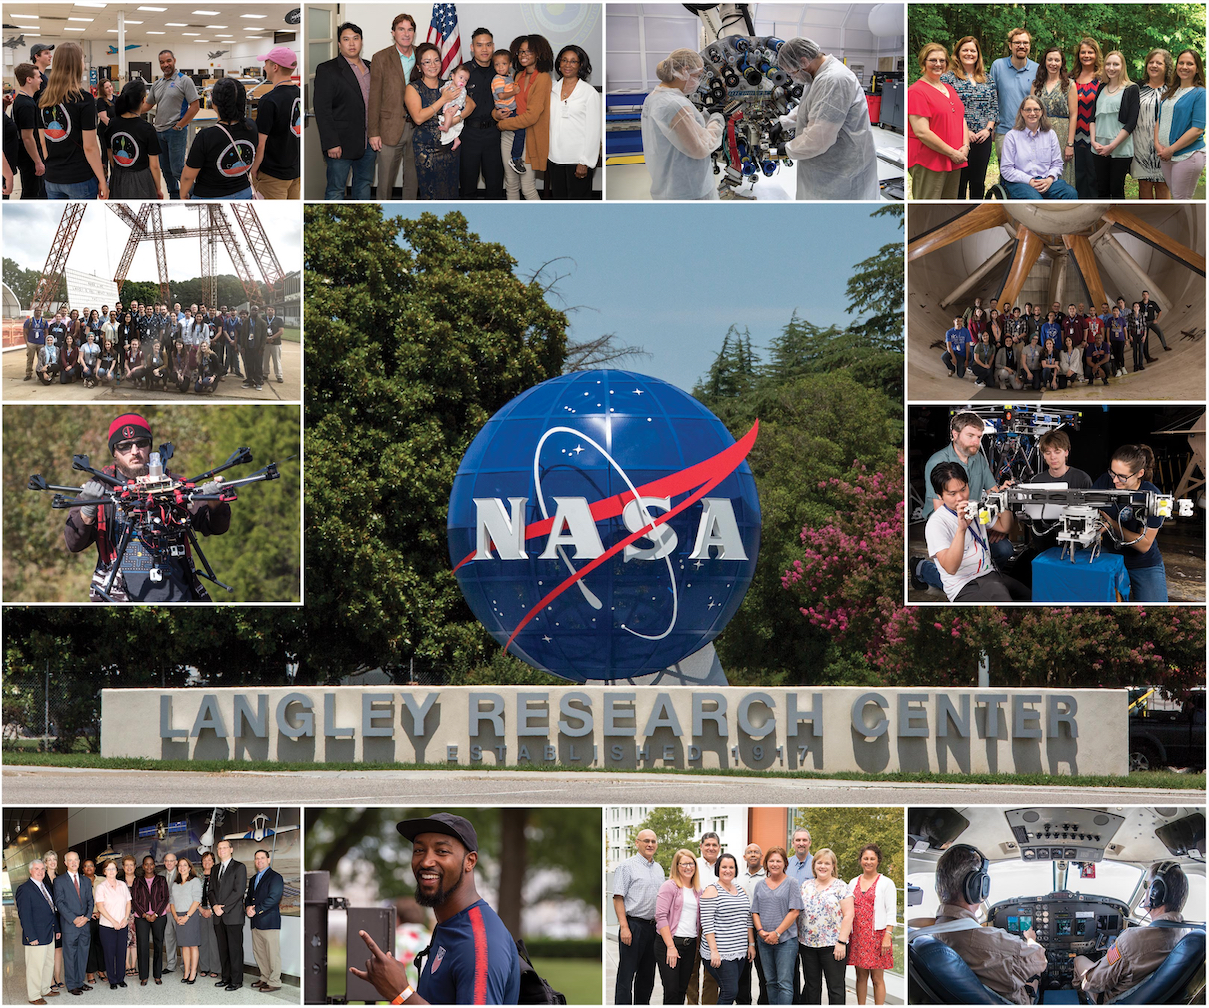 This is a collage of photos from throughout the year in 2019 at NASA Langley Research Center.